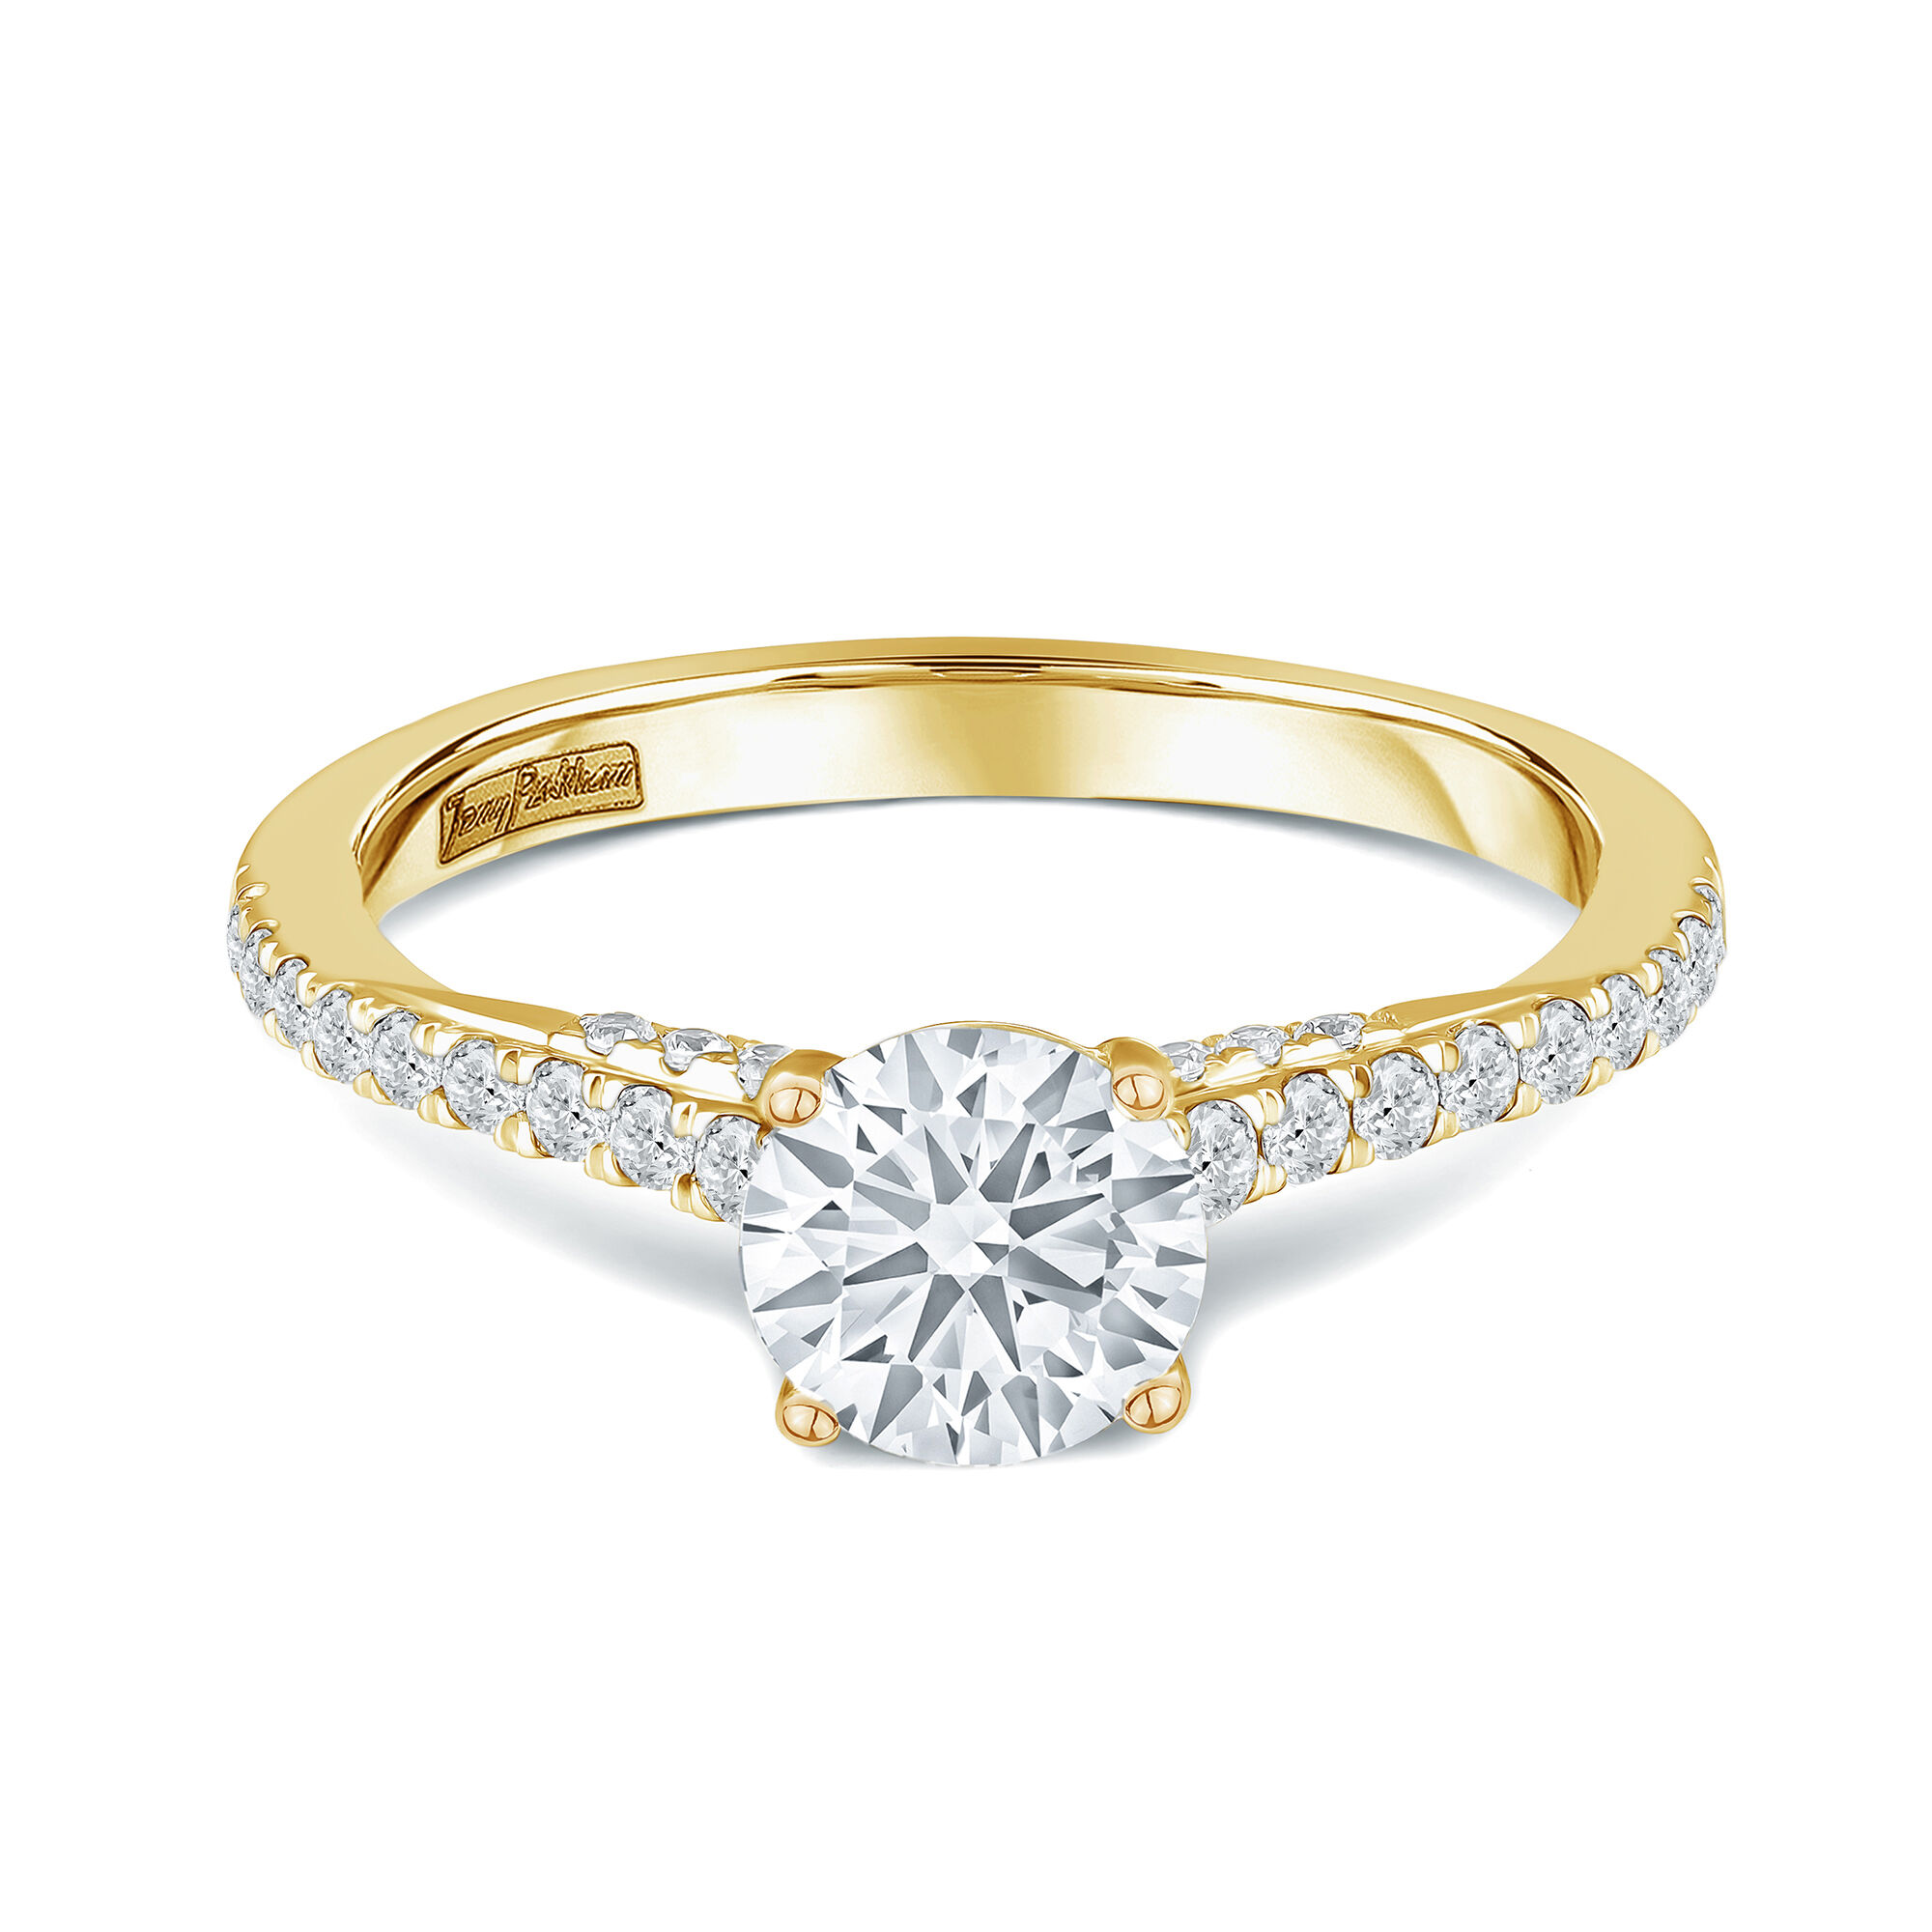 Jenny Packham Oval Cut 0.85 Carat Total Weight Diamond Art Deco Style Ring  In 18 Carat White Gold - Livingstons Jewellers